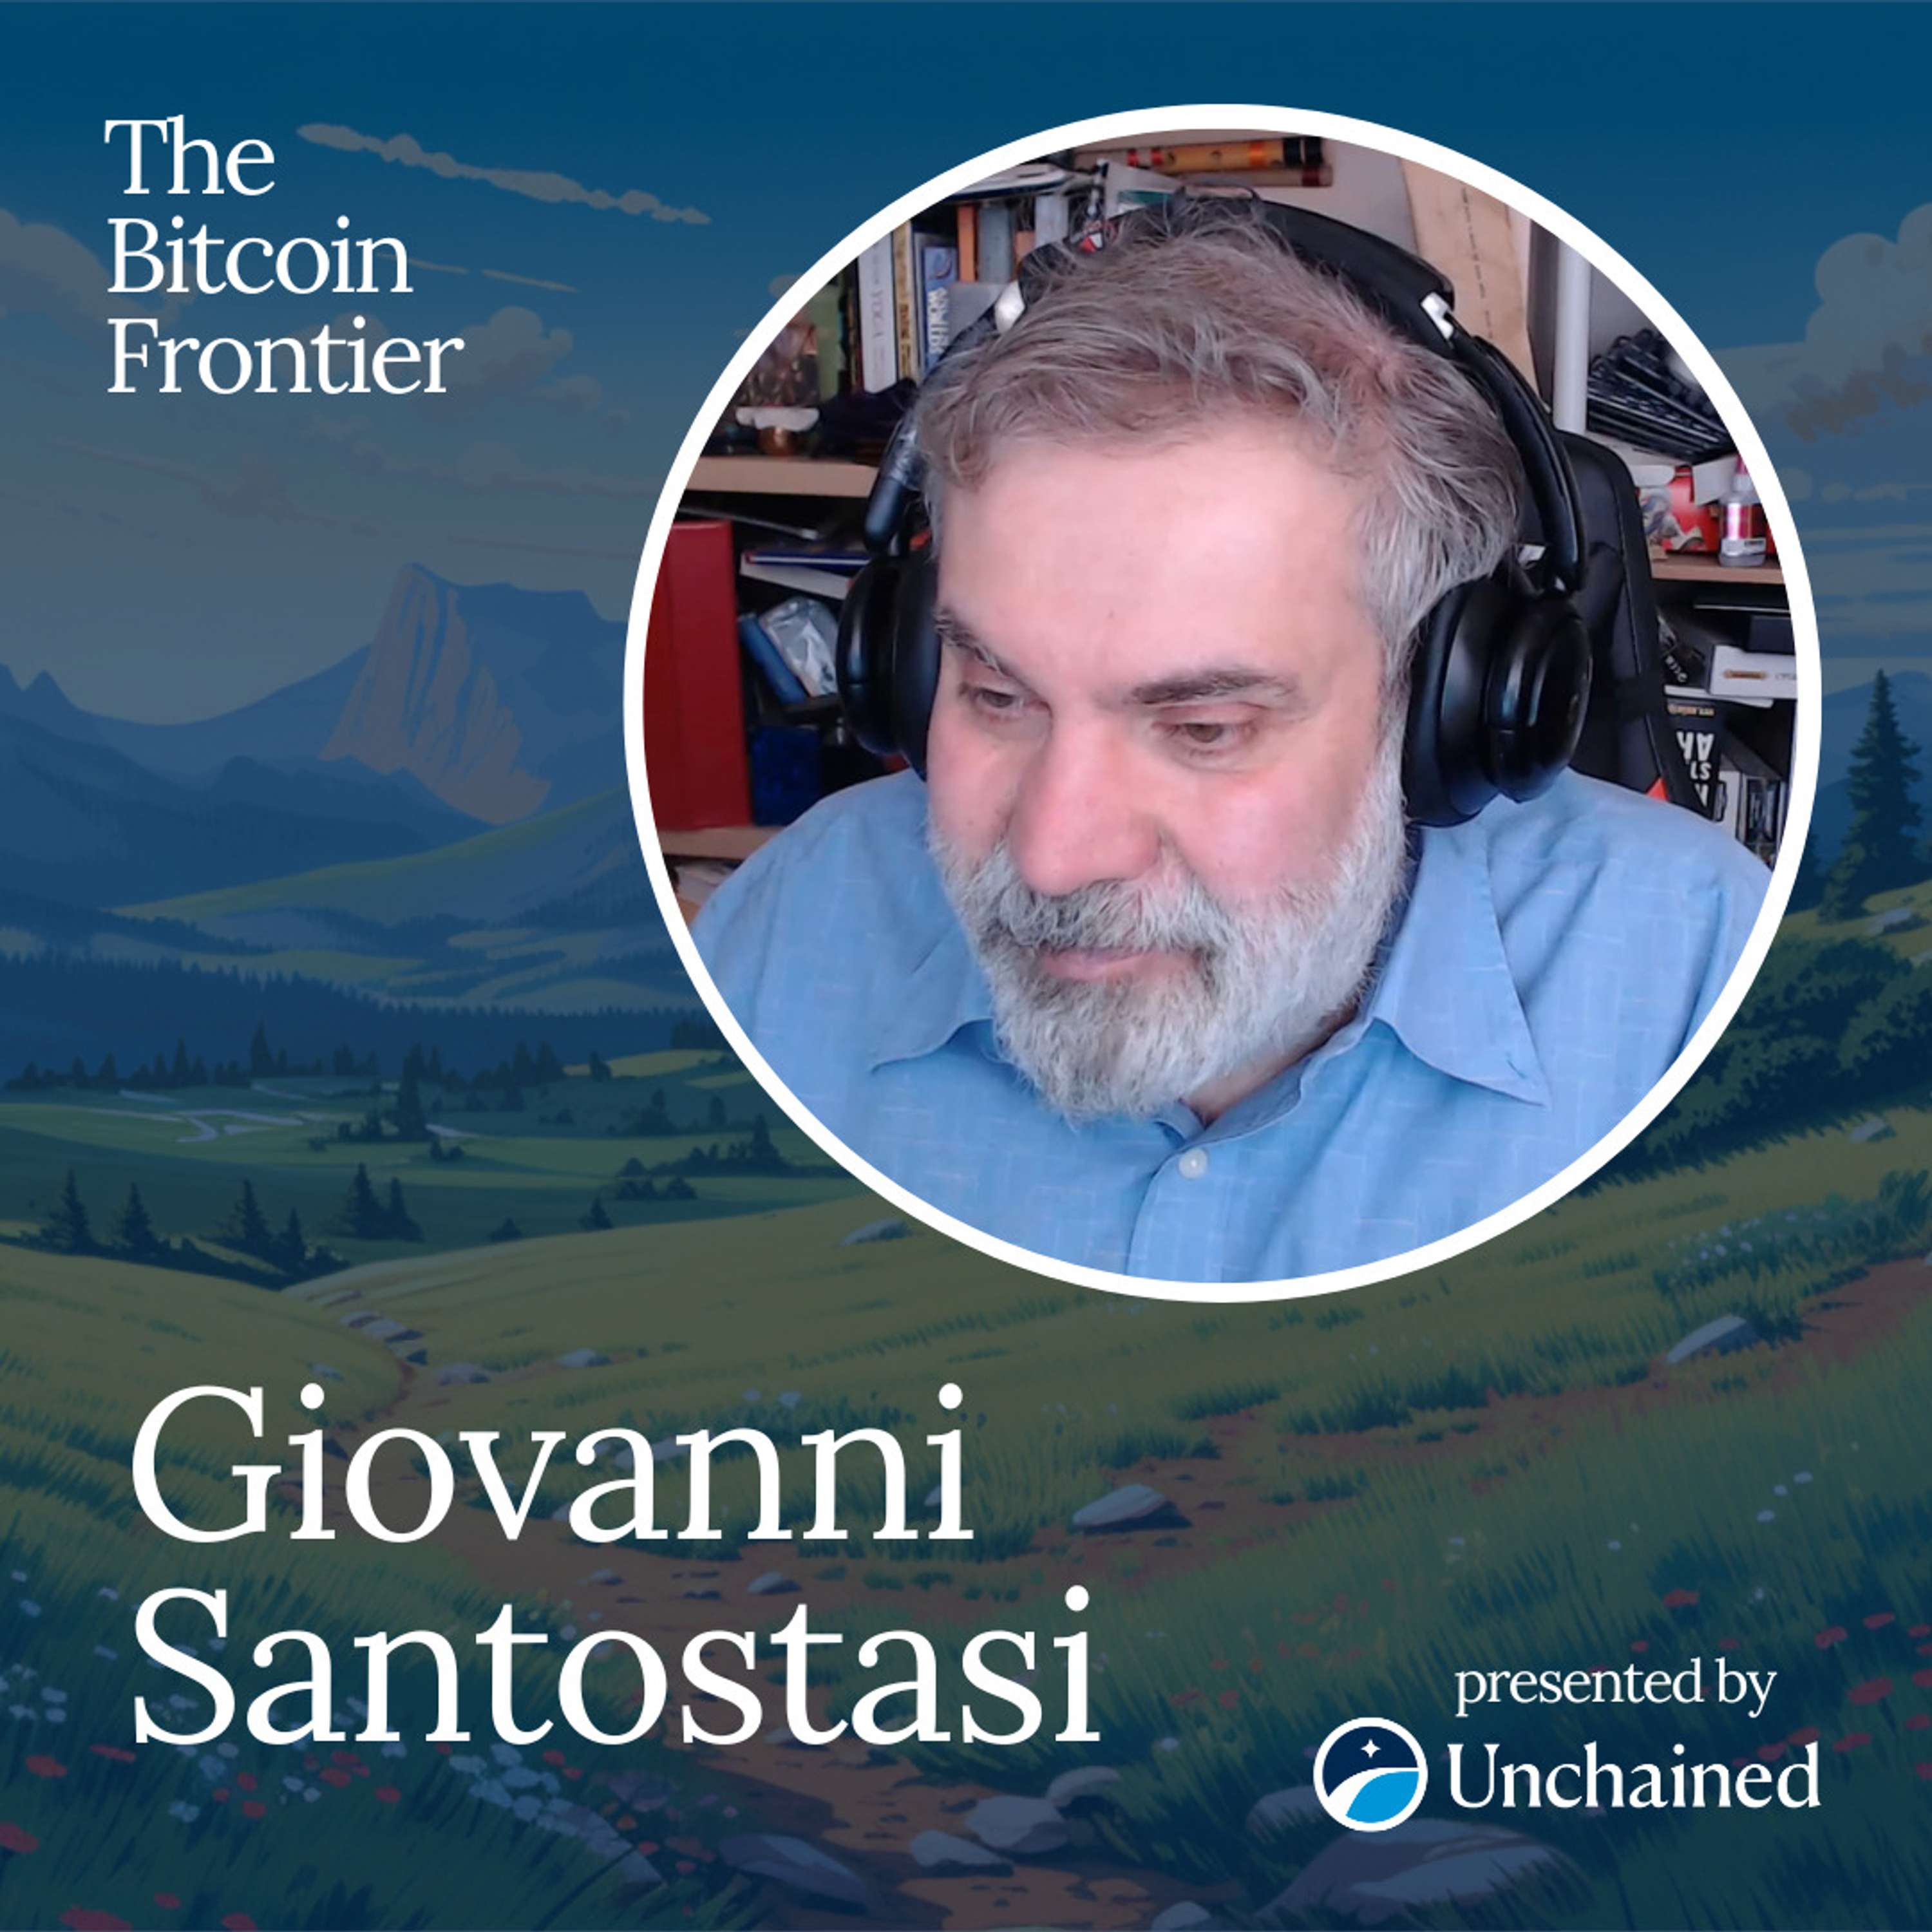 The science behind $1,000,000 bitcoin with Giovanni Santostasi